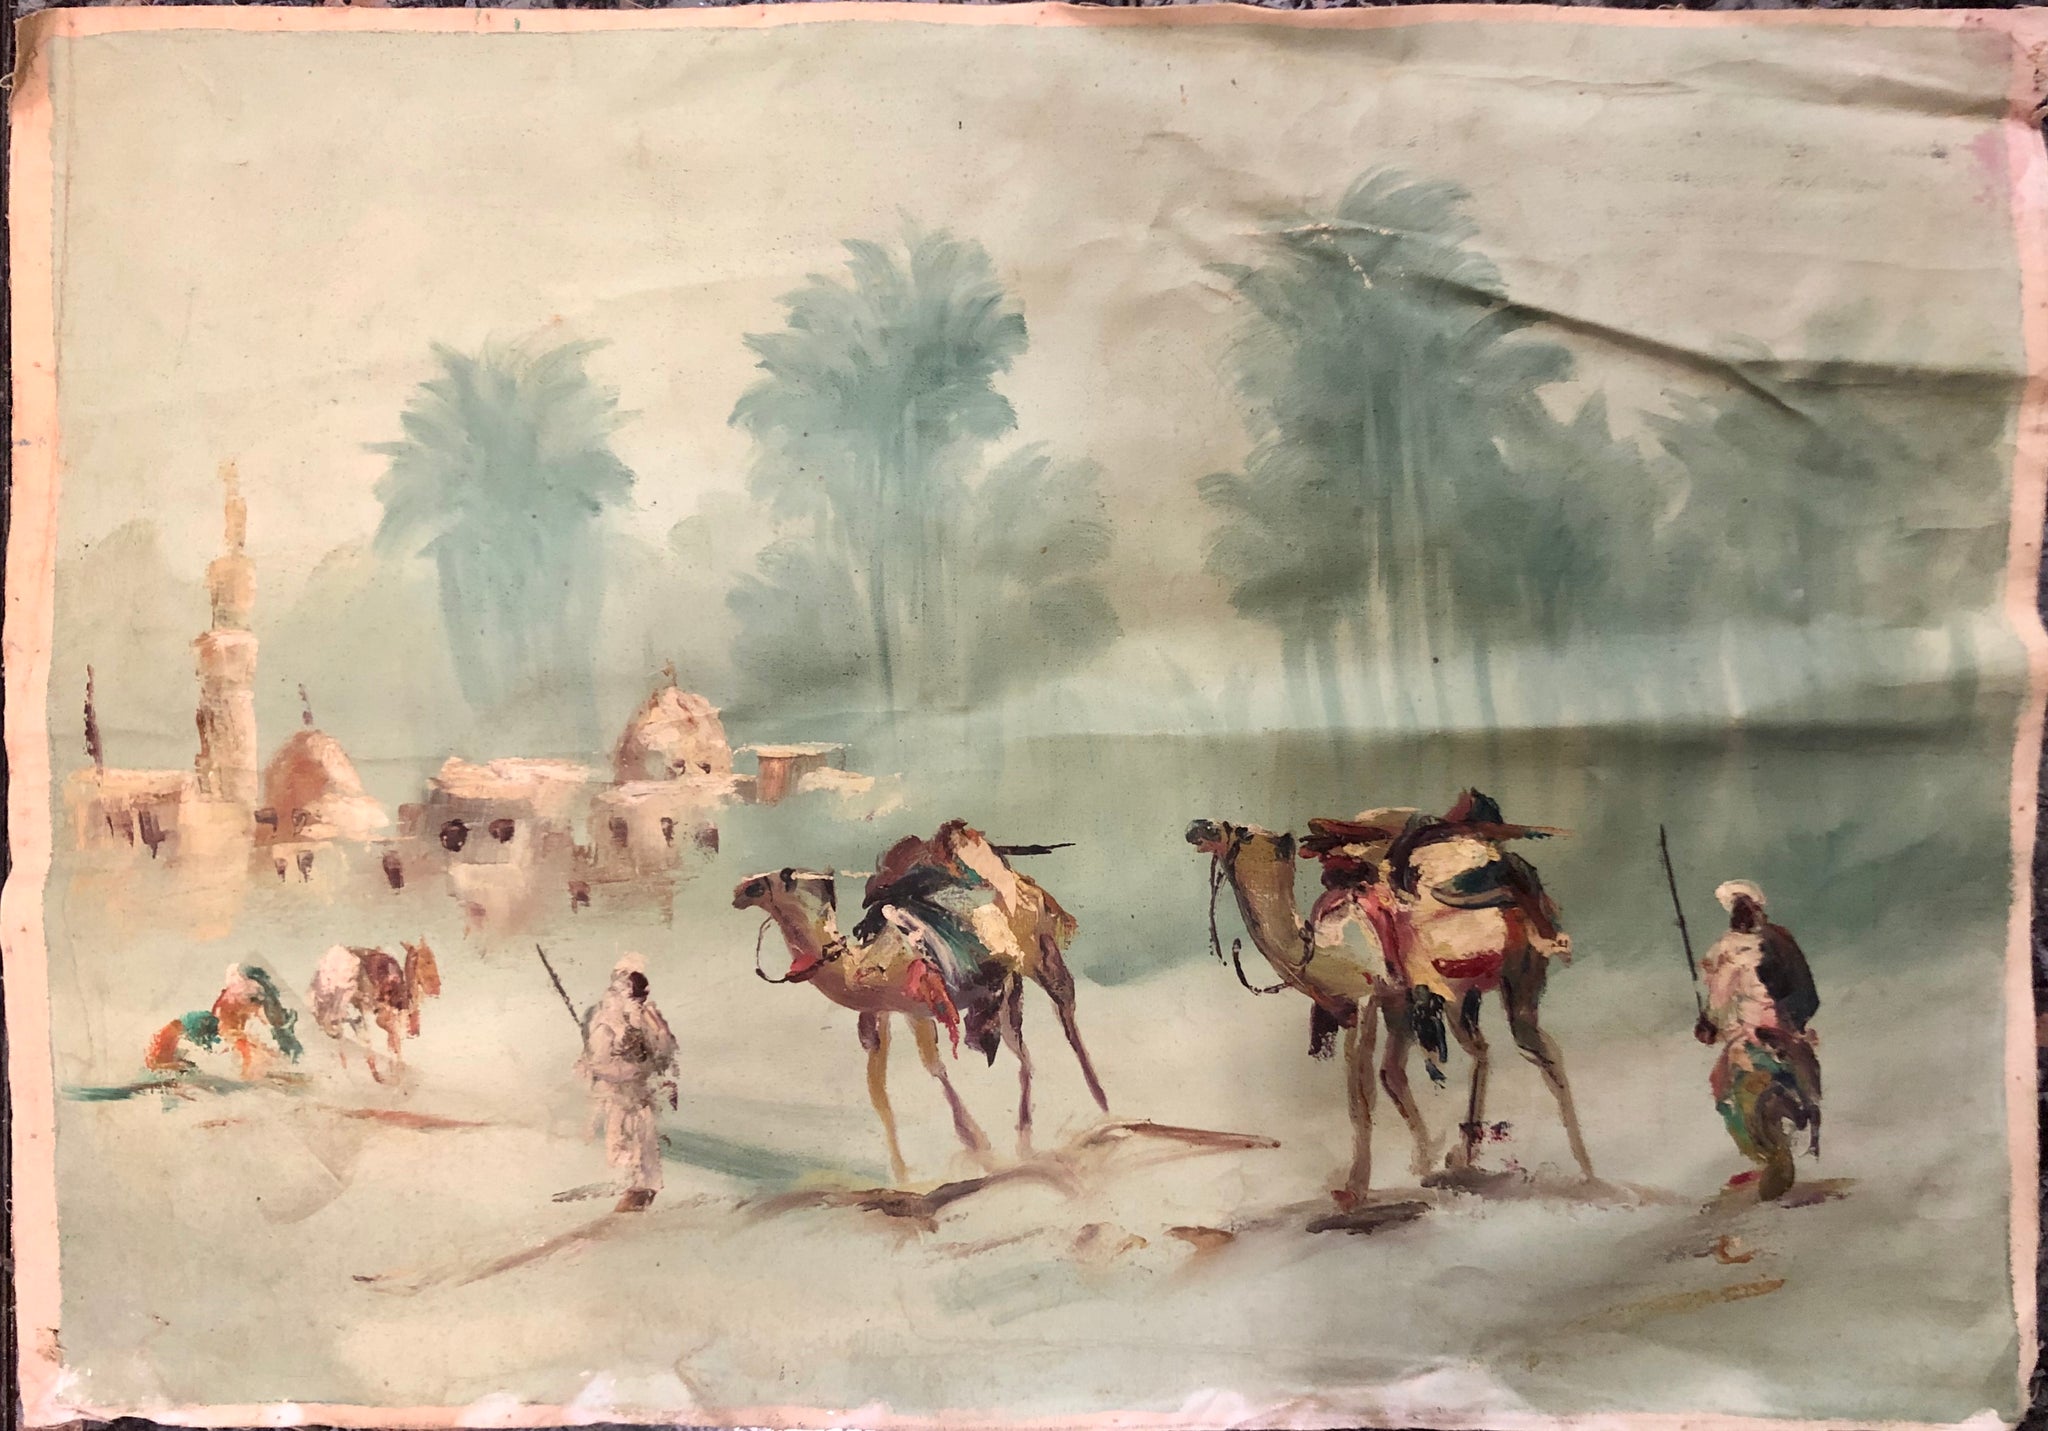 The Arabian Dessert, Camels carrying goods and a mosque surrounded by palm trees, handmade Oil Painting.